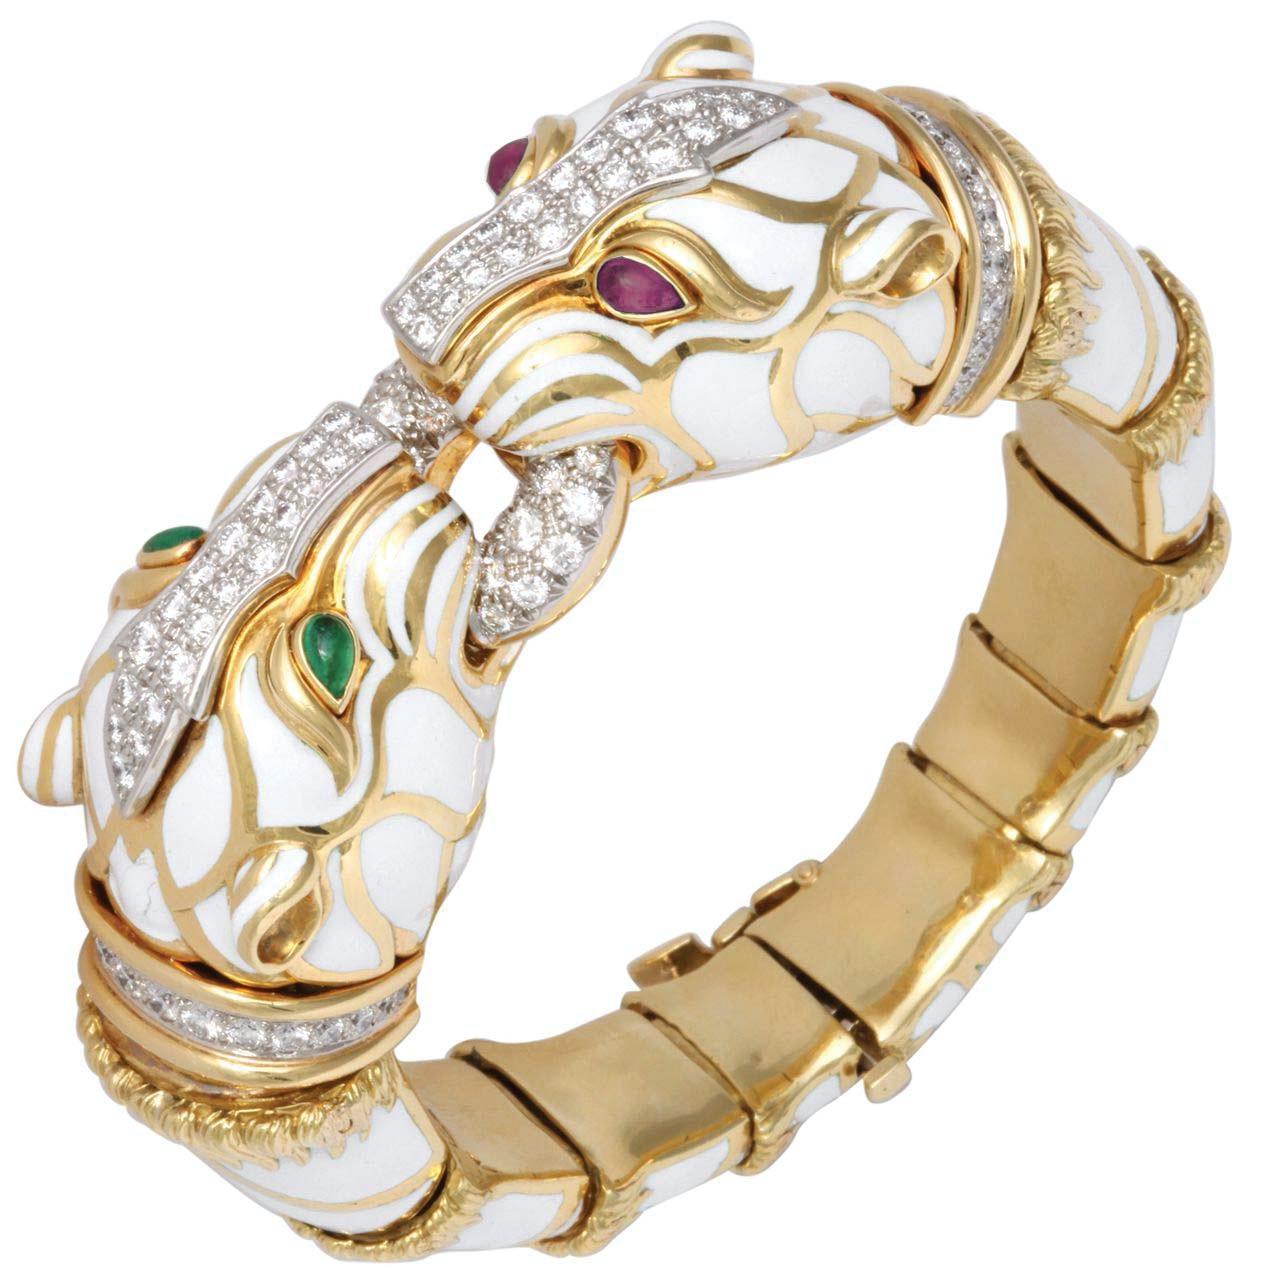 A chic David Webb double tiger bracelet in polished 18kt gold with white enamel, cabochon emeralds and rubies, brilliant-cut diamonds, and platinum. Circa 1970s. Made in the USA.